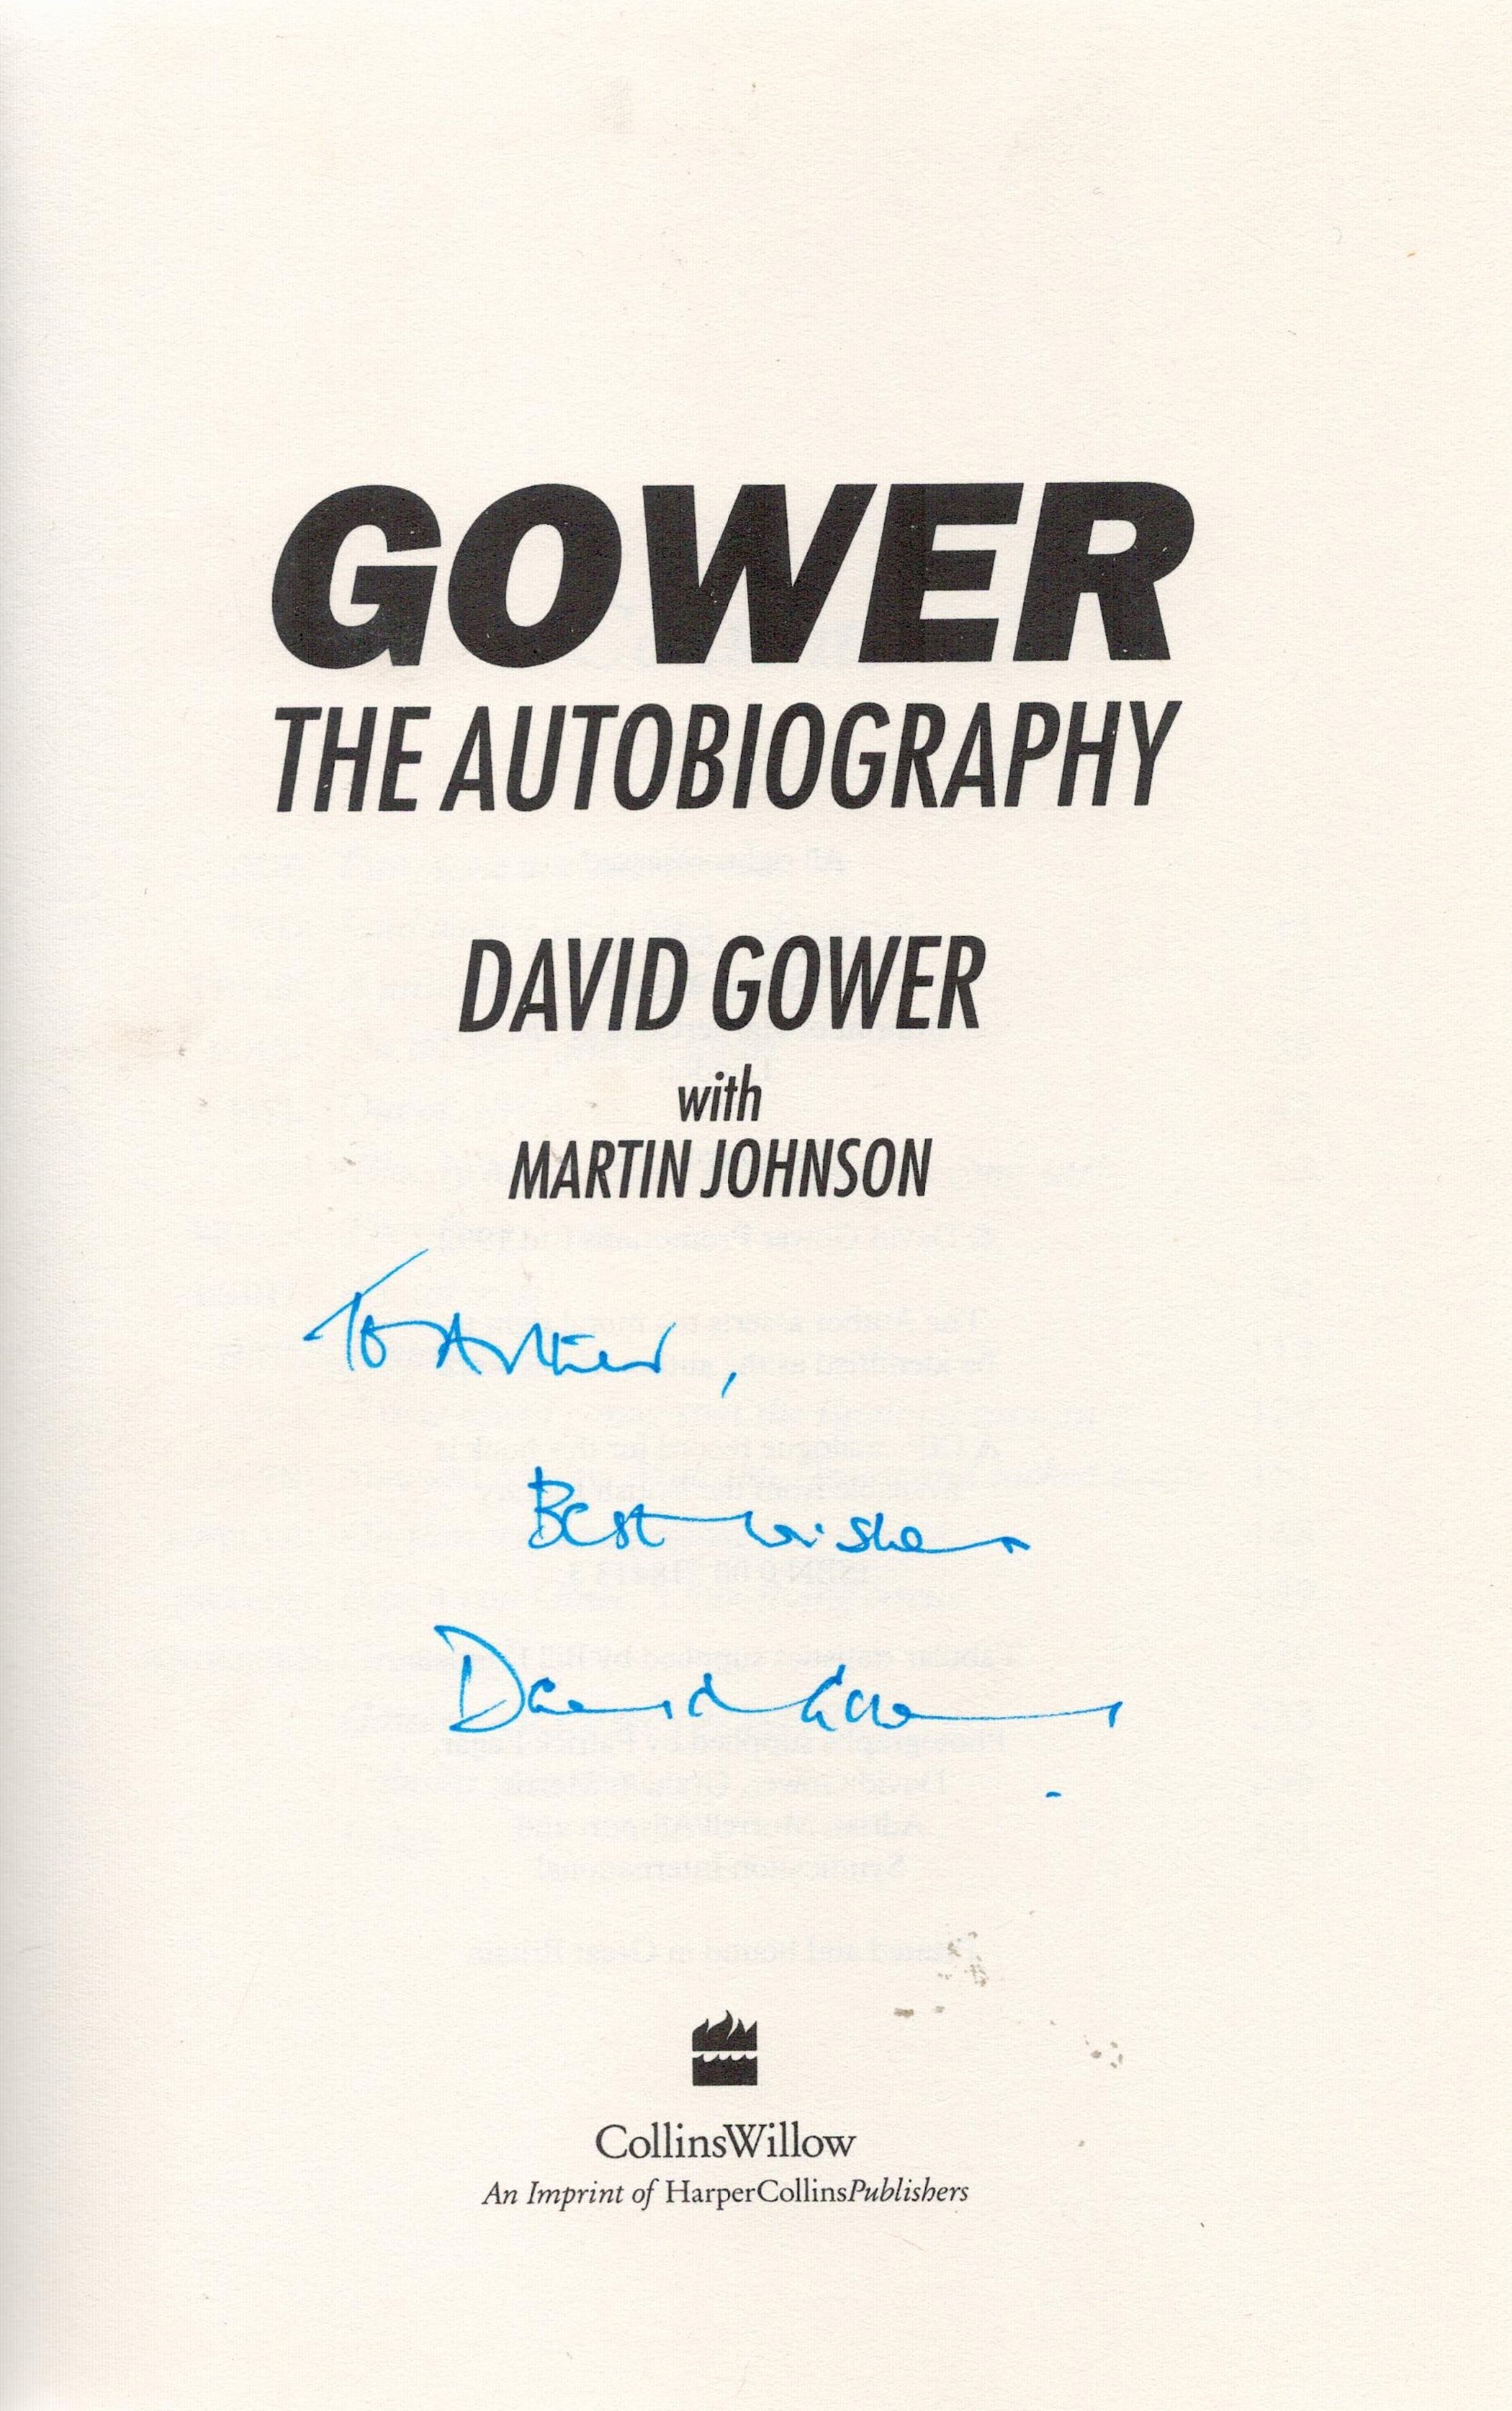 Signed Book David Gower The Autobiography Second Edition 1992 Hardback Book Signed by David Gower on - Image 3 of 4